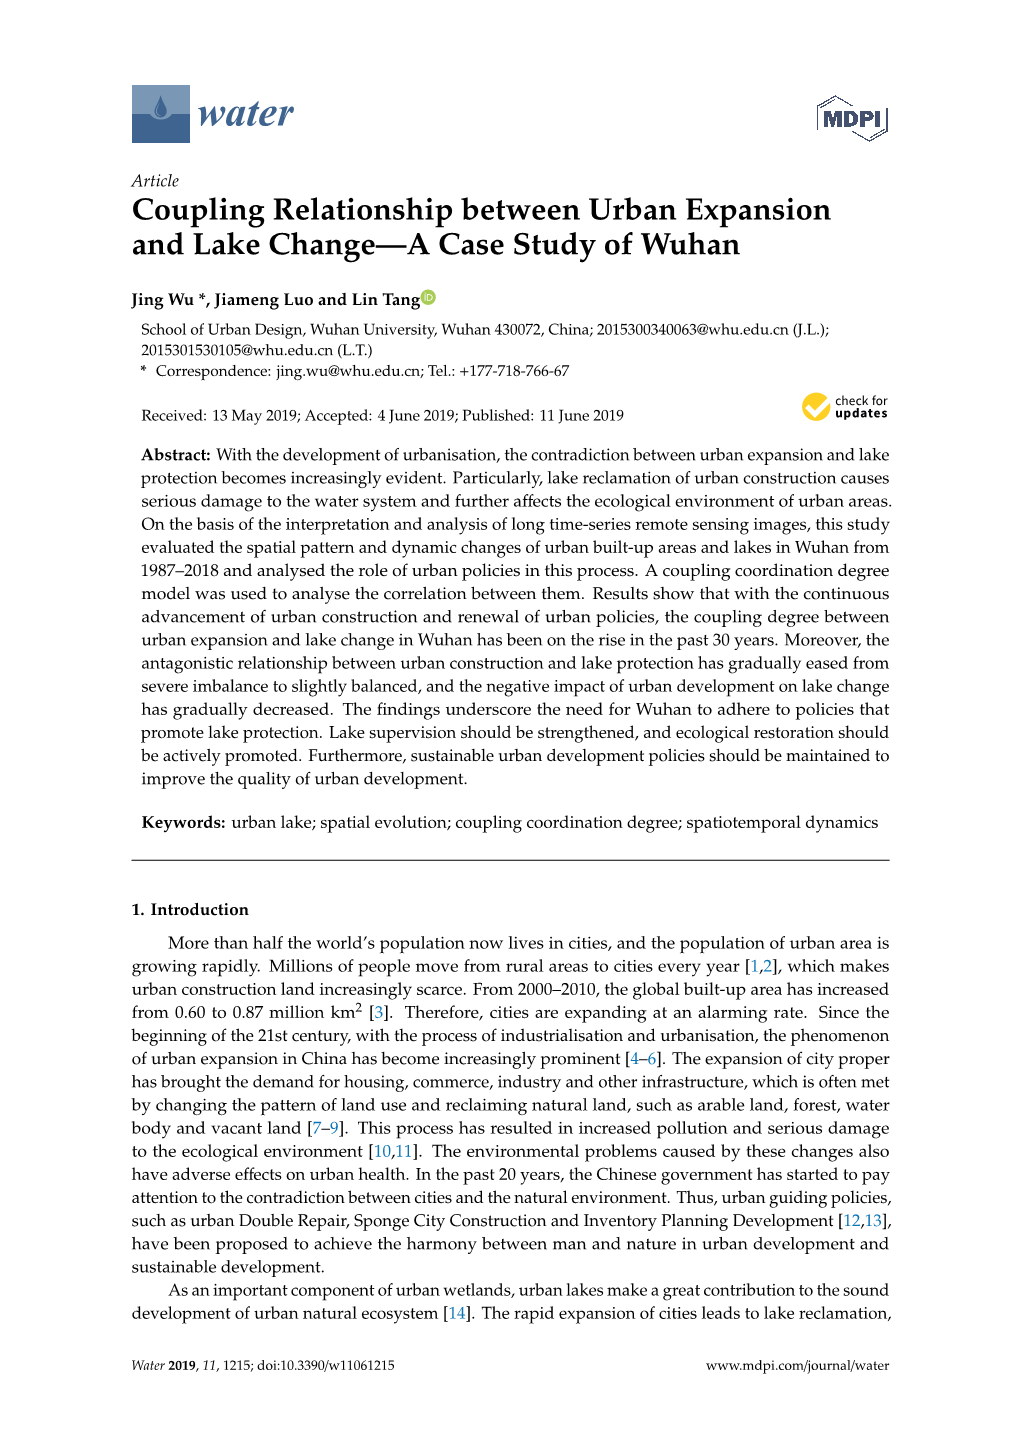 Coupling Relationship Between Urban Expansion and Lake Change—A Case Study of Wuhan